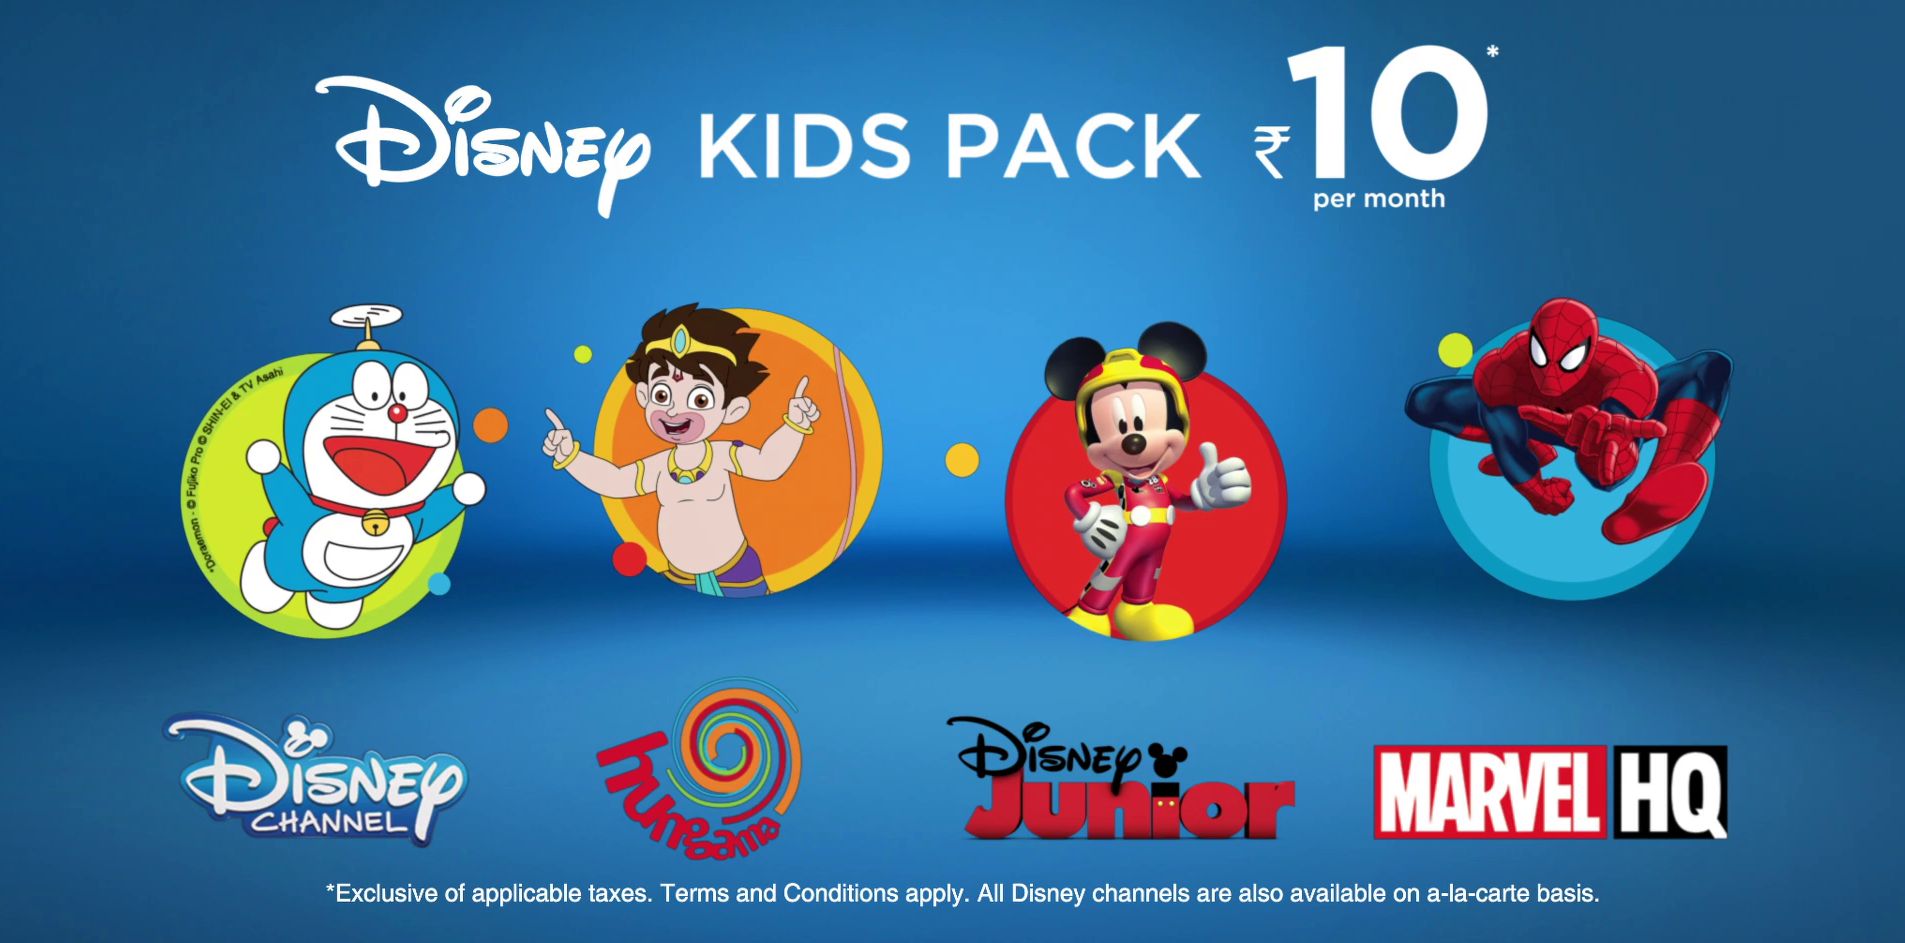 Disney Kids Pack From Star India Offering Kids Channels At INR 10